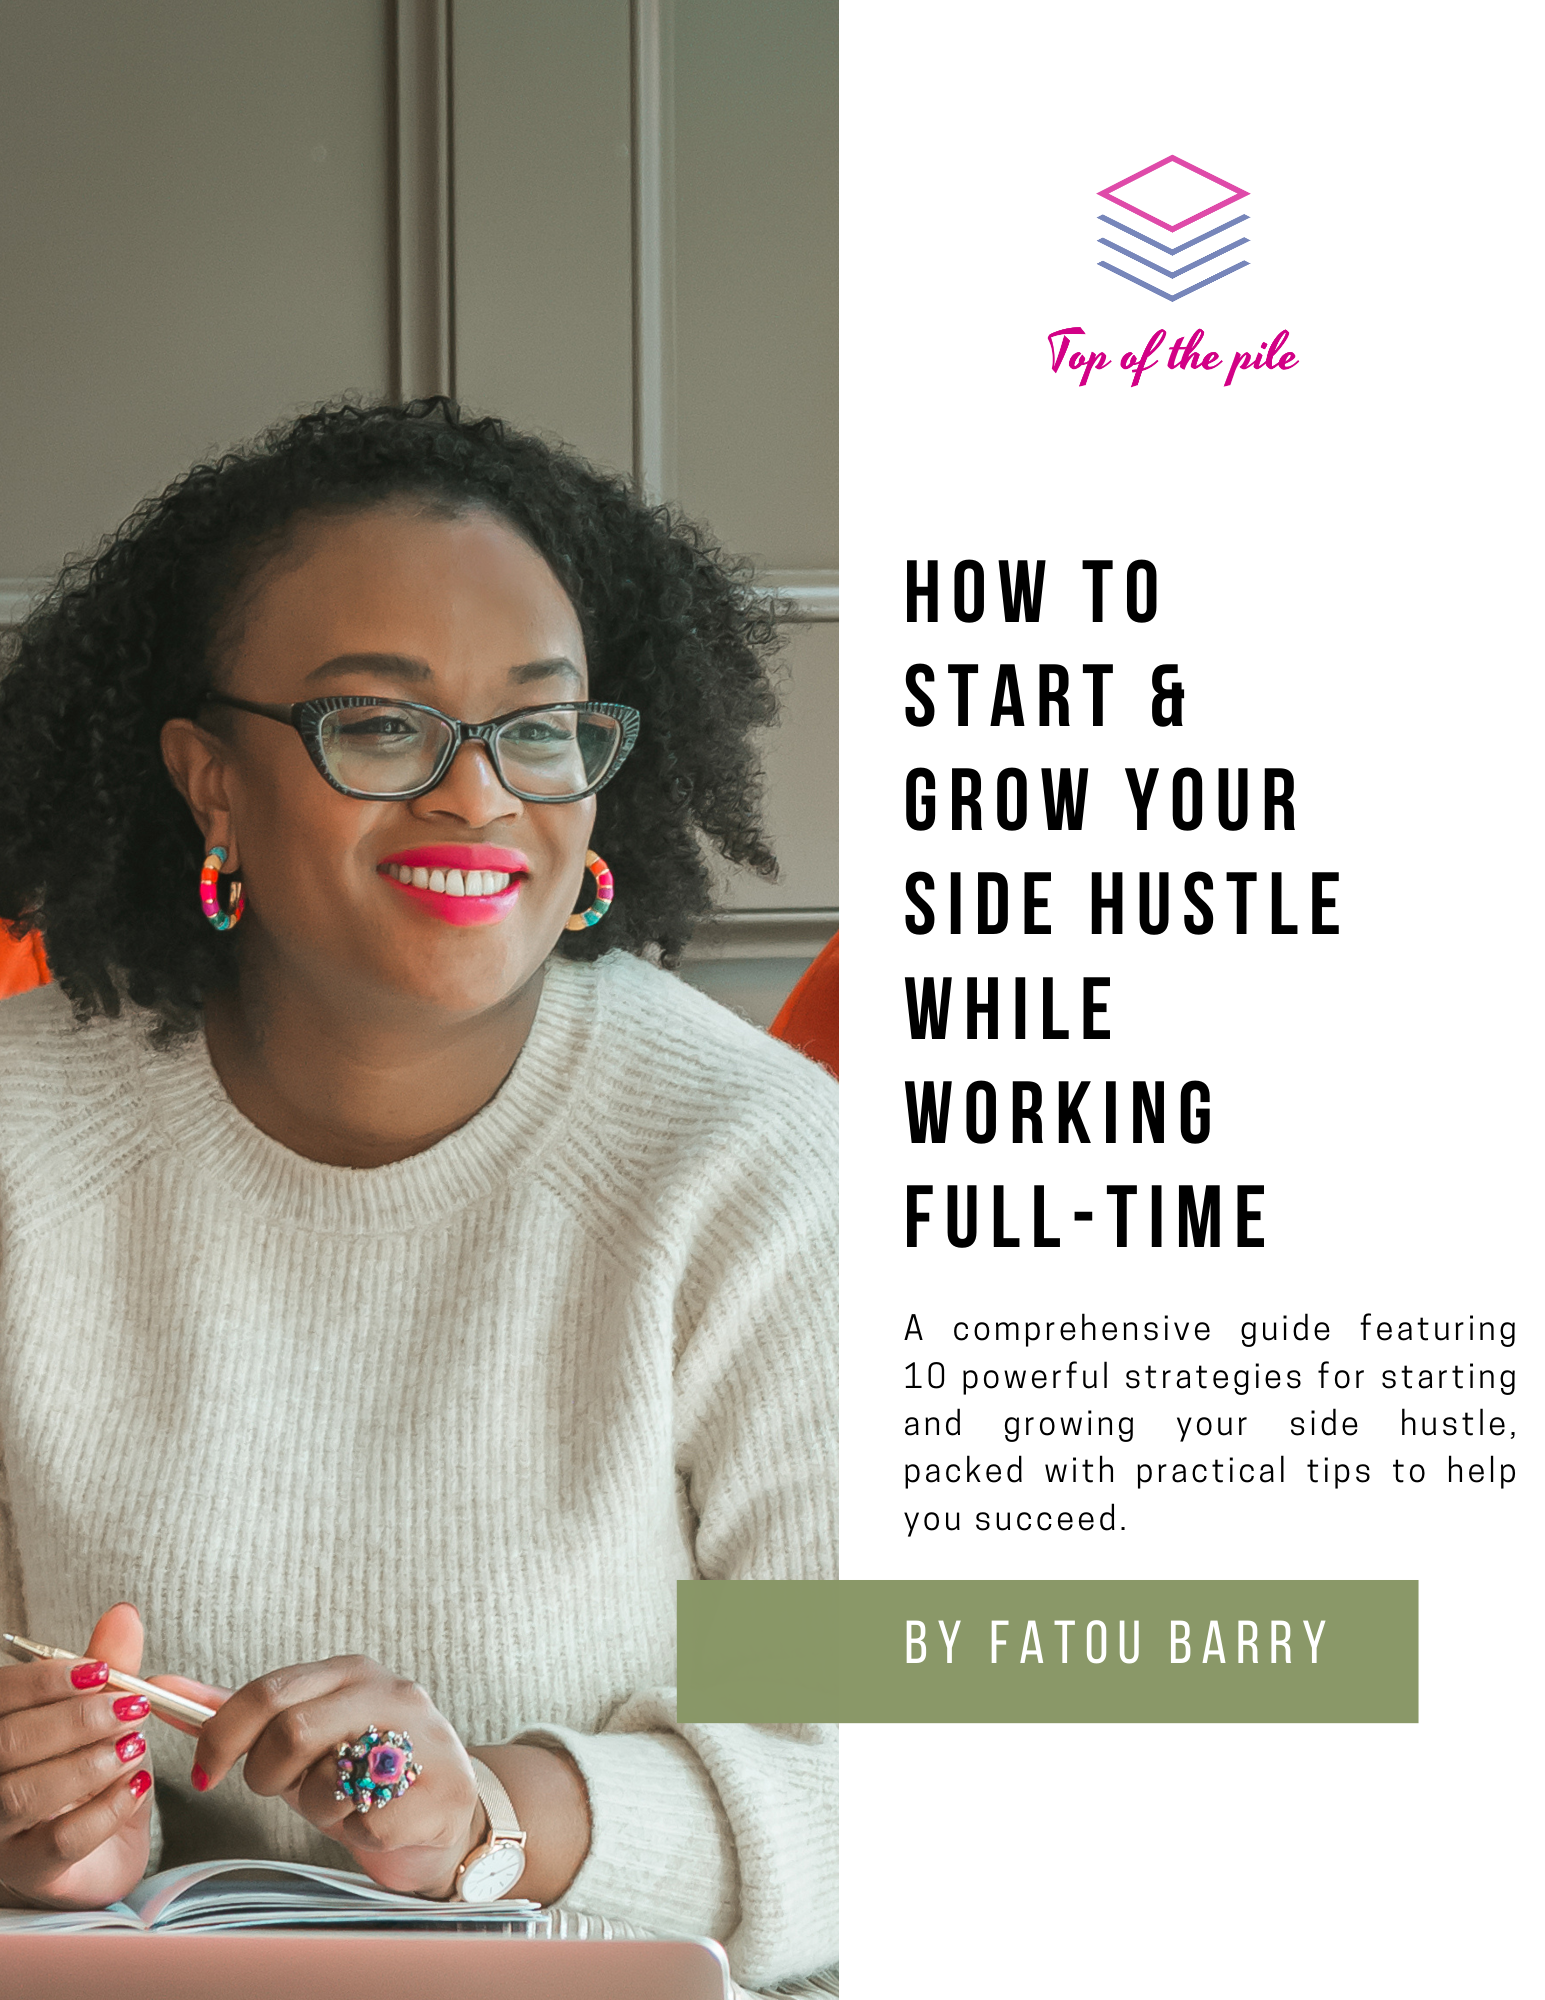 How to start & grow a side hustle while working full-time